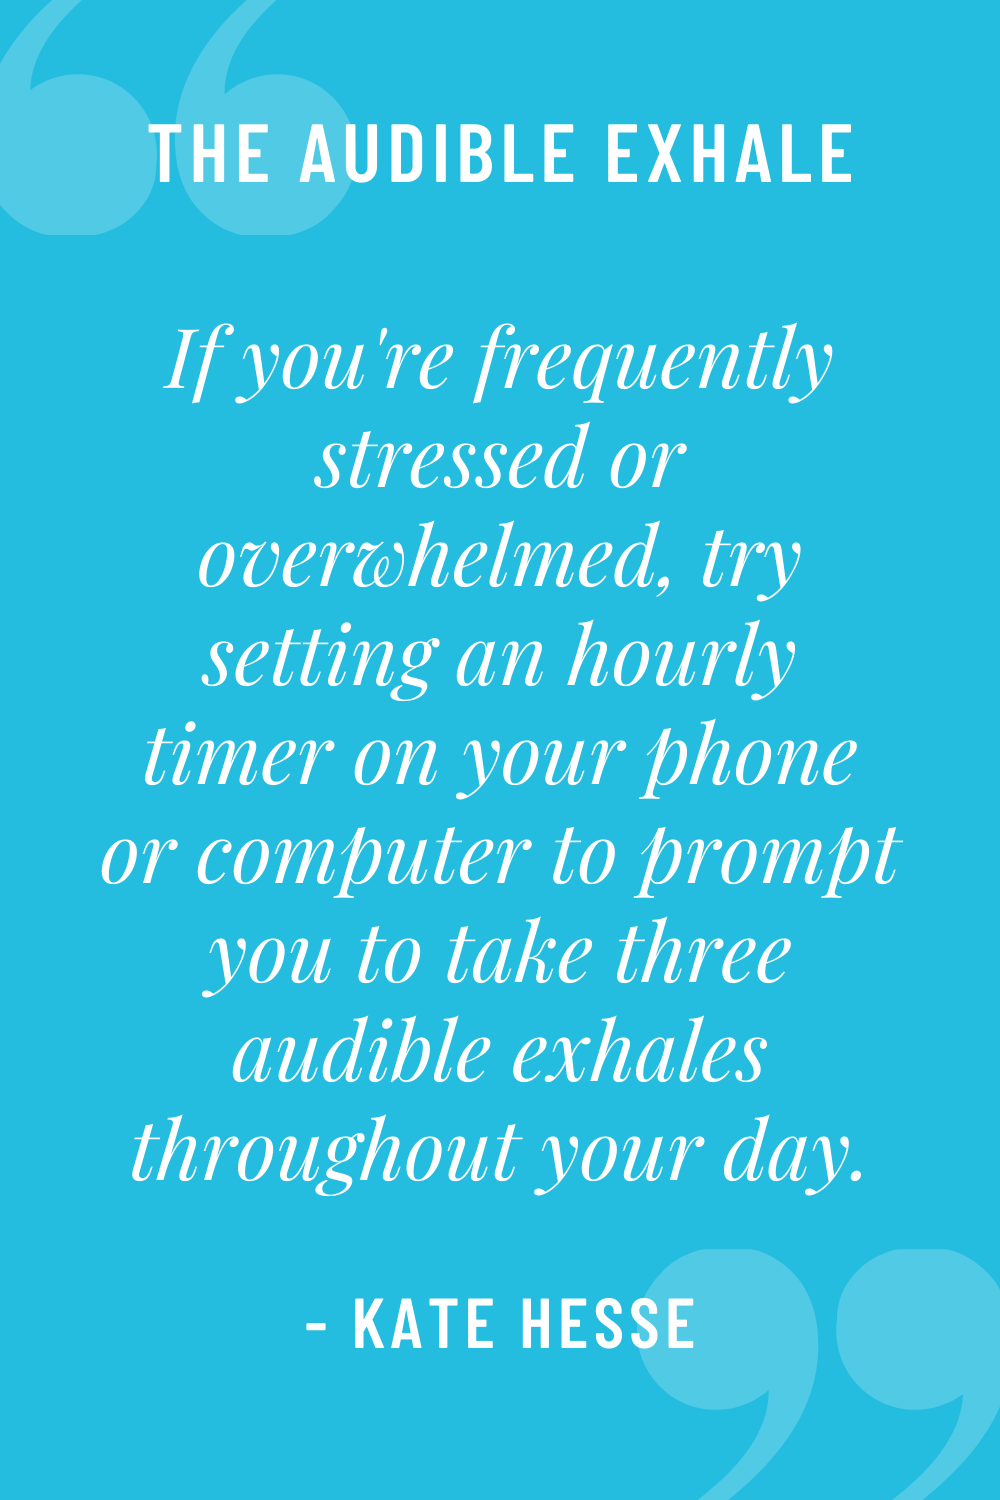 If you're frequently stressed or overwhelmed, try setting an hourly timer on your phone or computer to prompt you to take three audible exhales throughout your day.